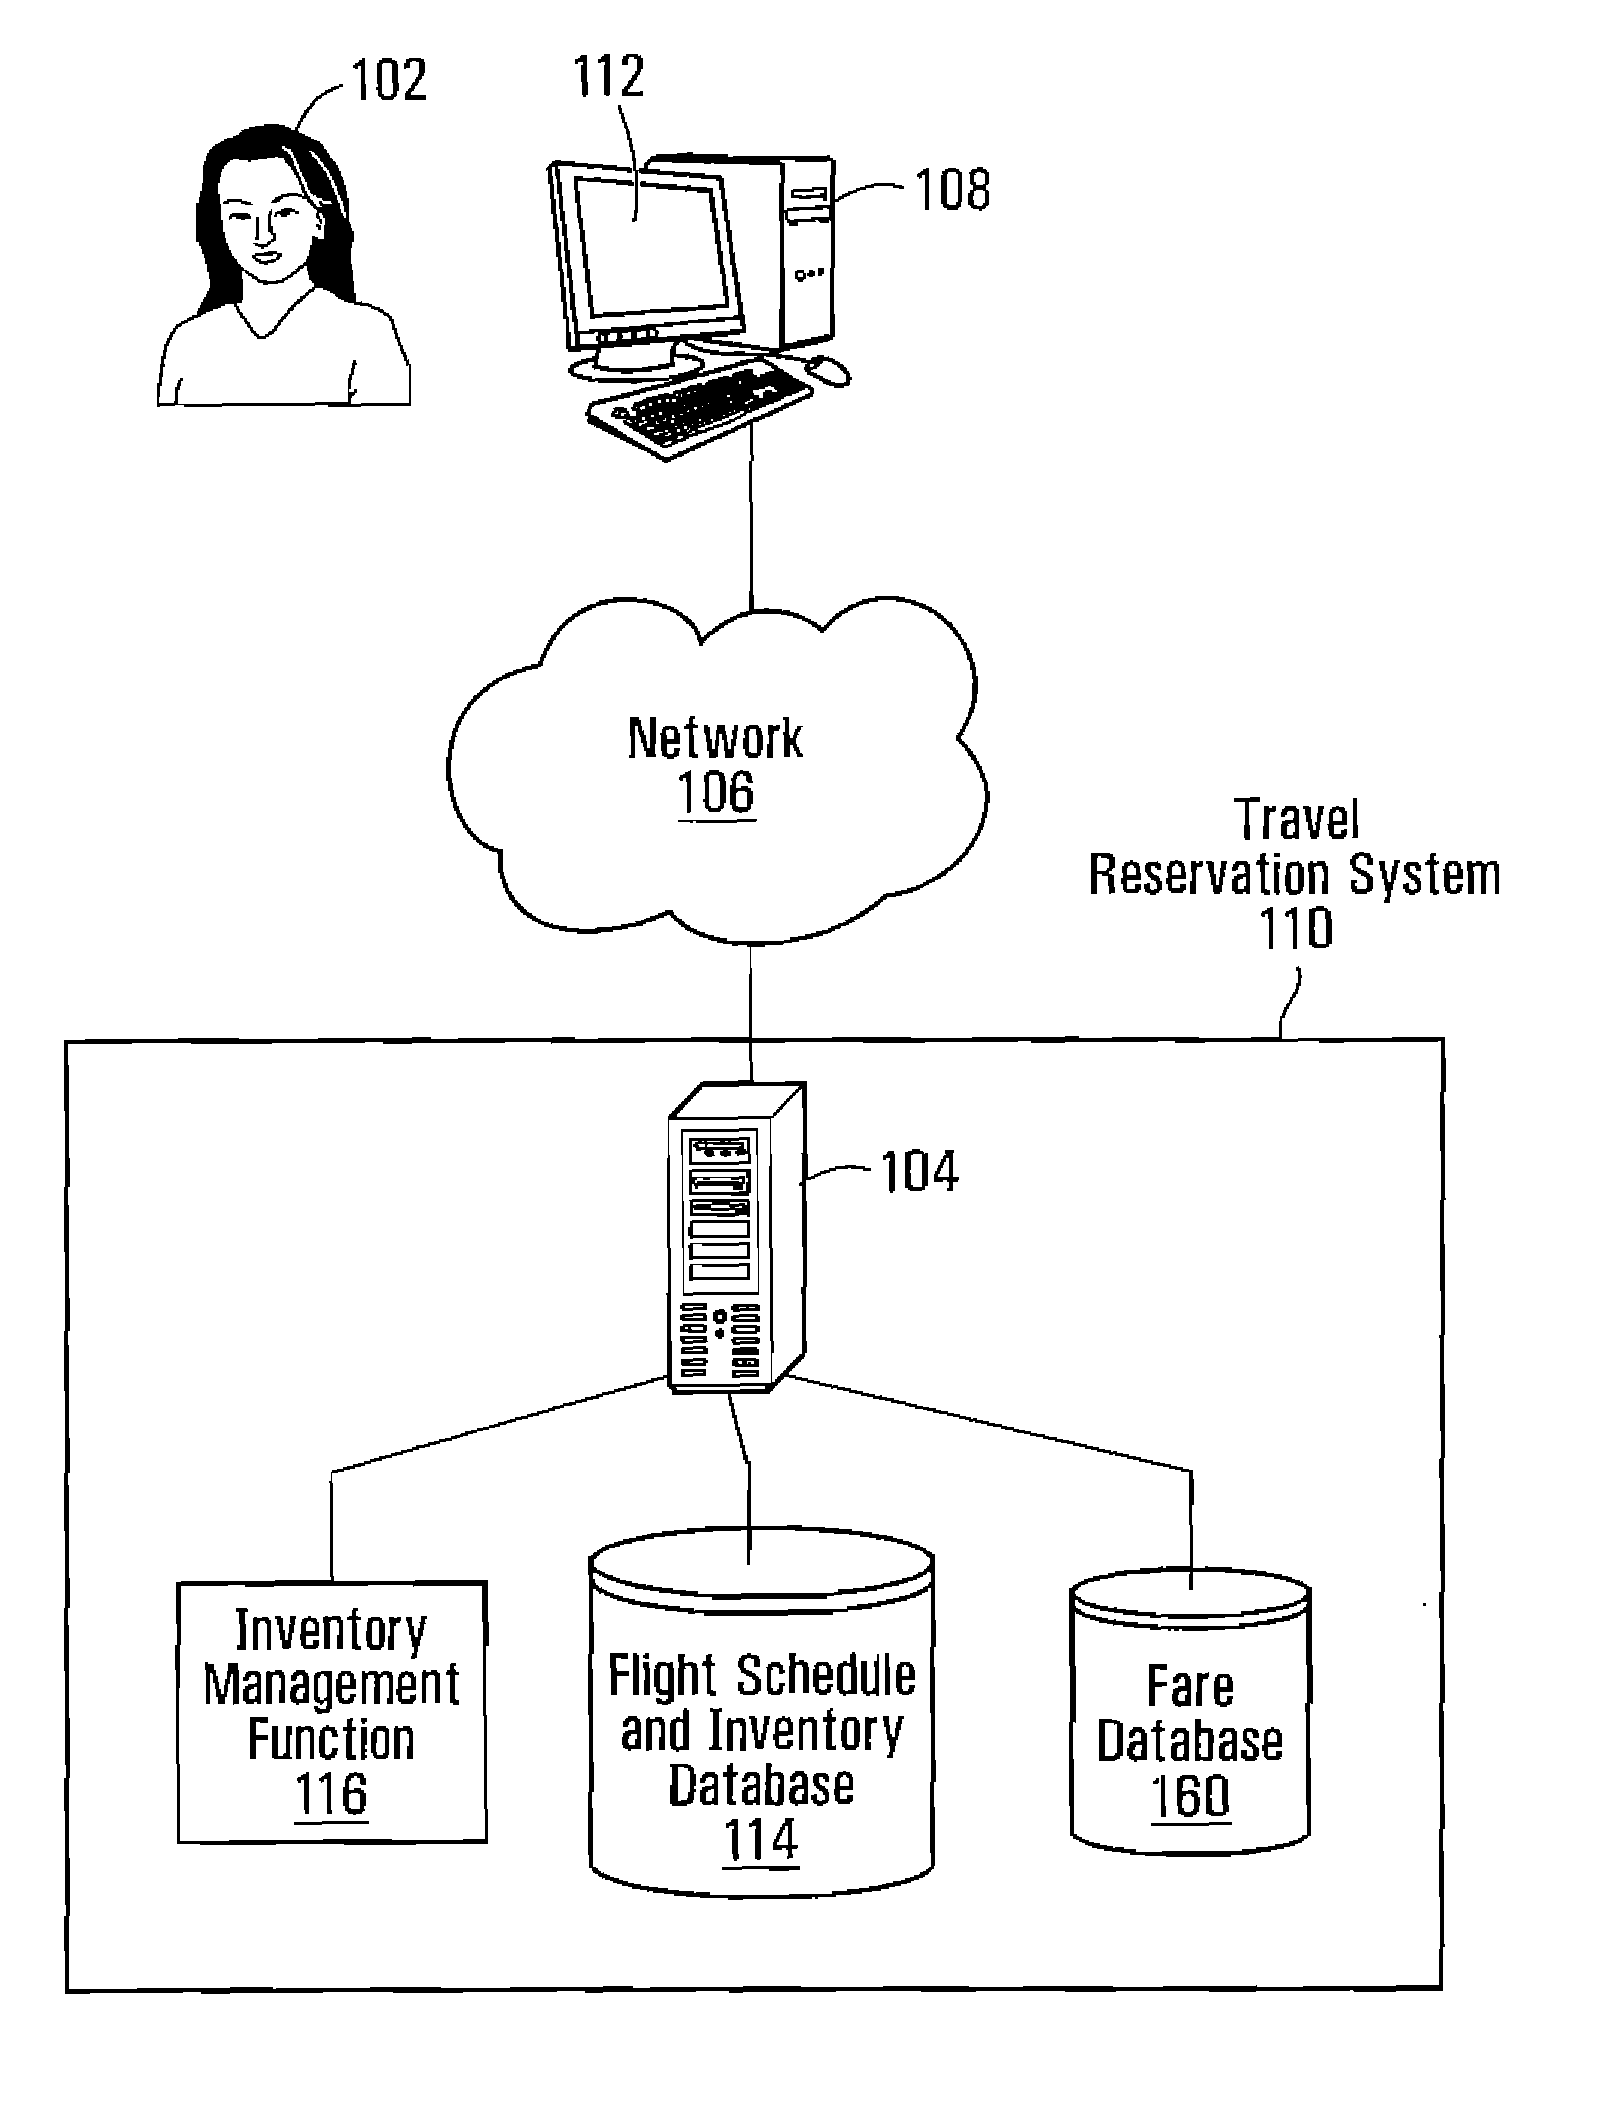 Methods and systems for vending air travel services